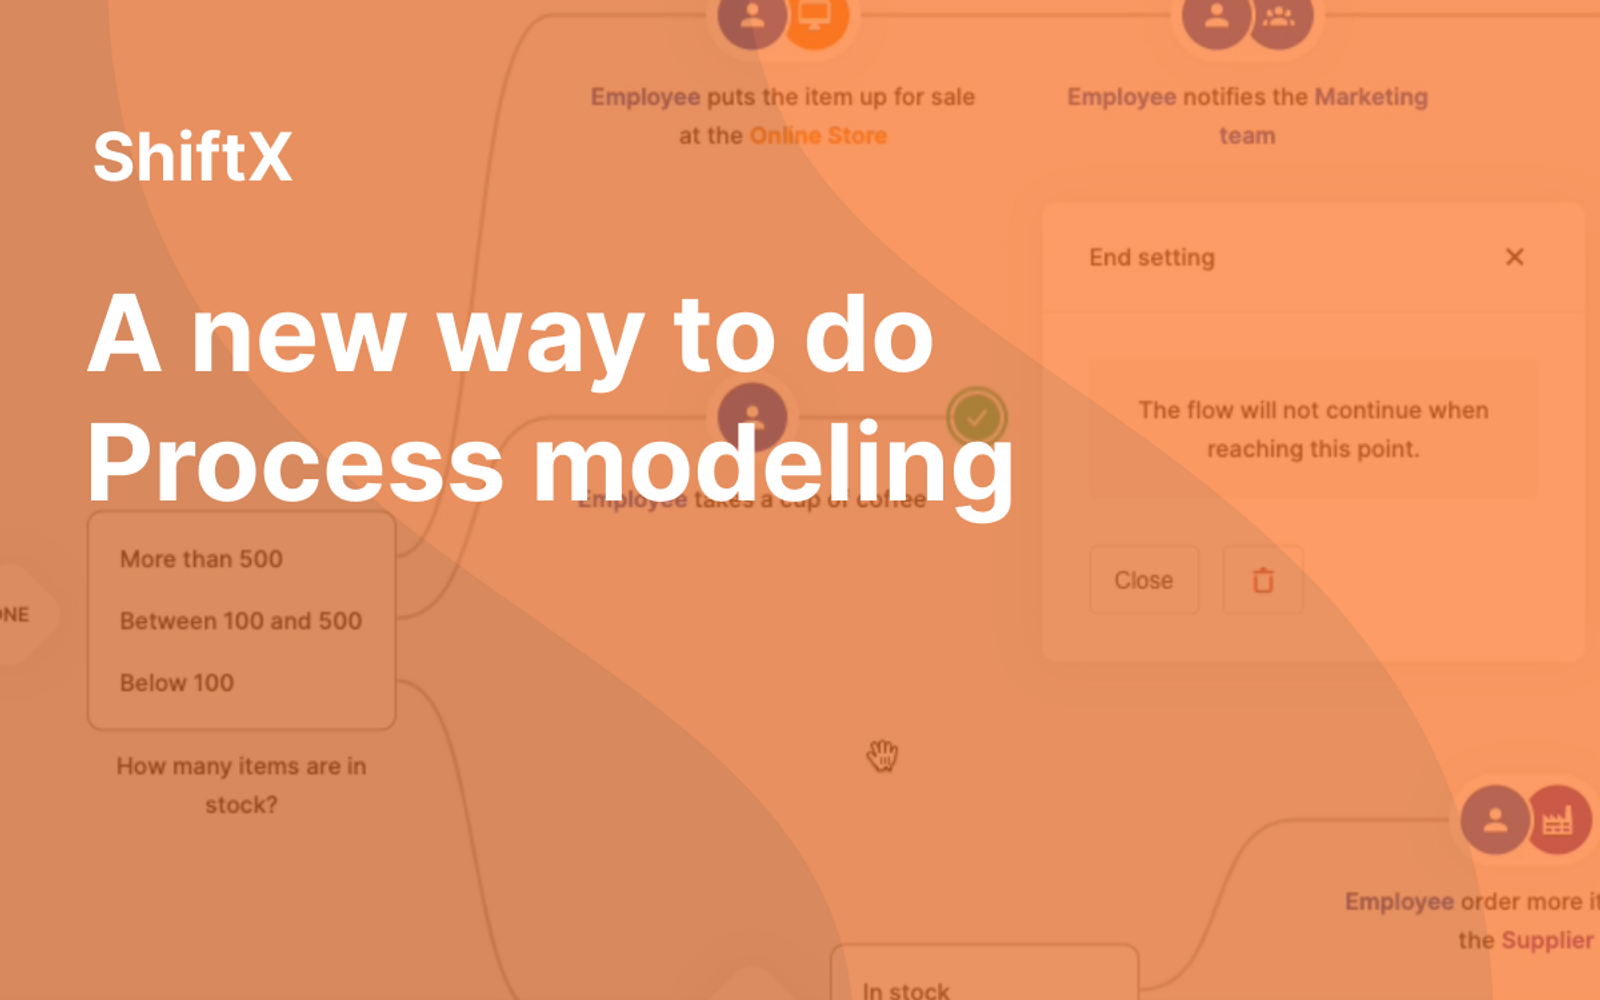 "ShiftX – A new way to do Process modeling" written in white over orange background showing a process visualization